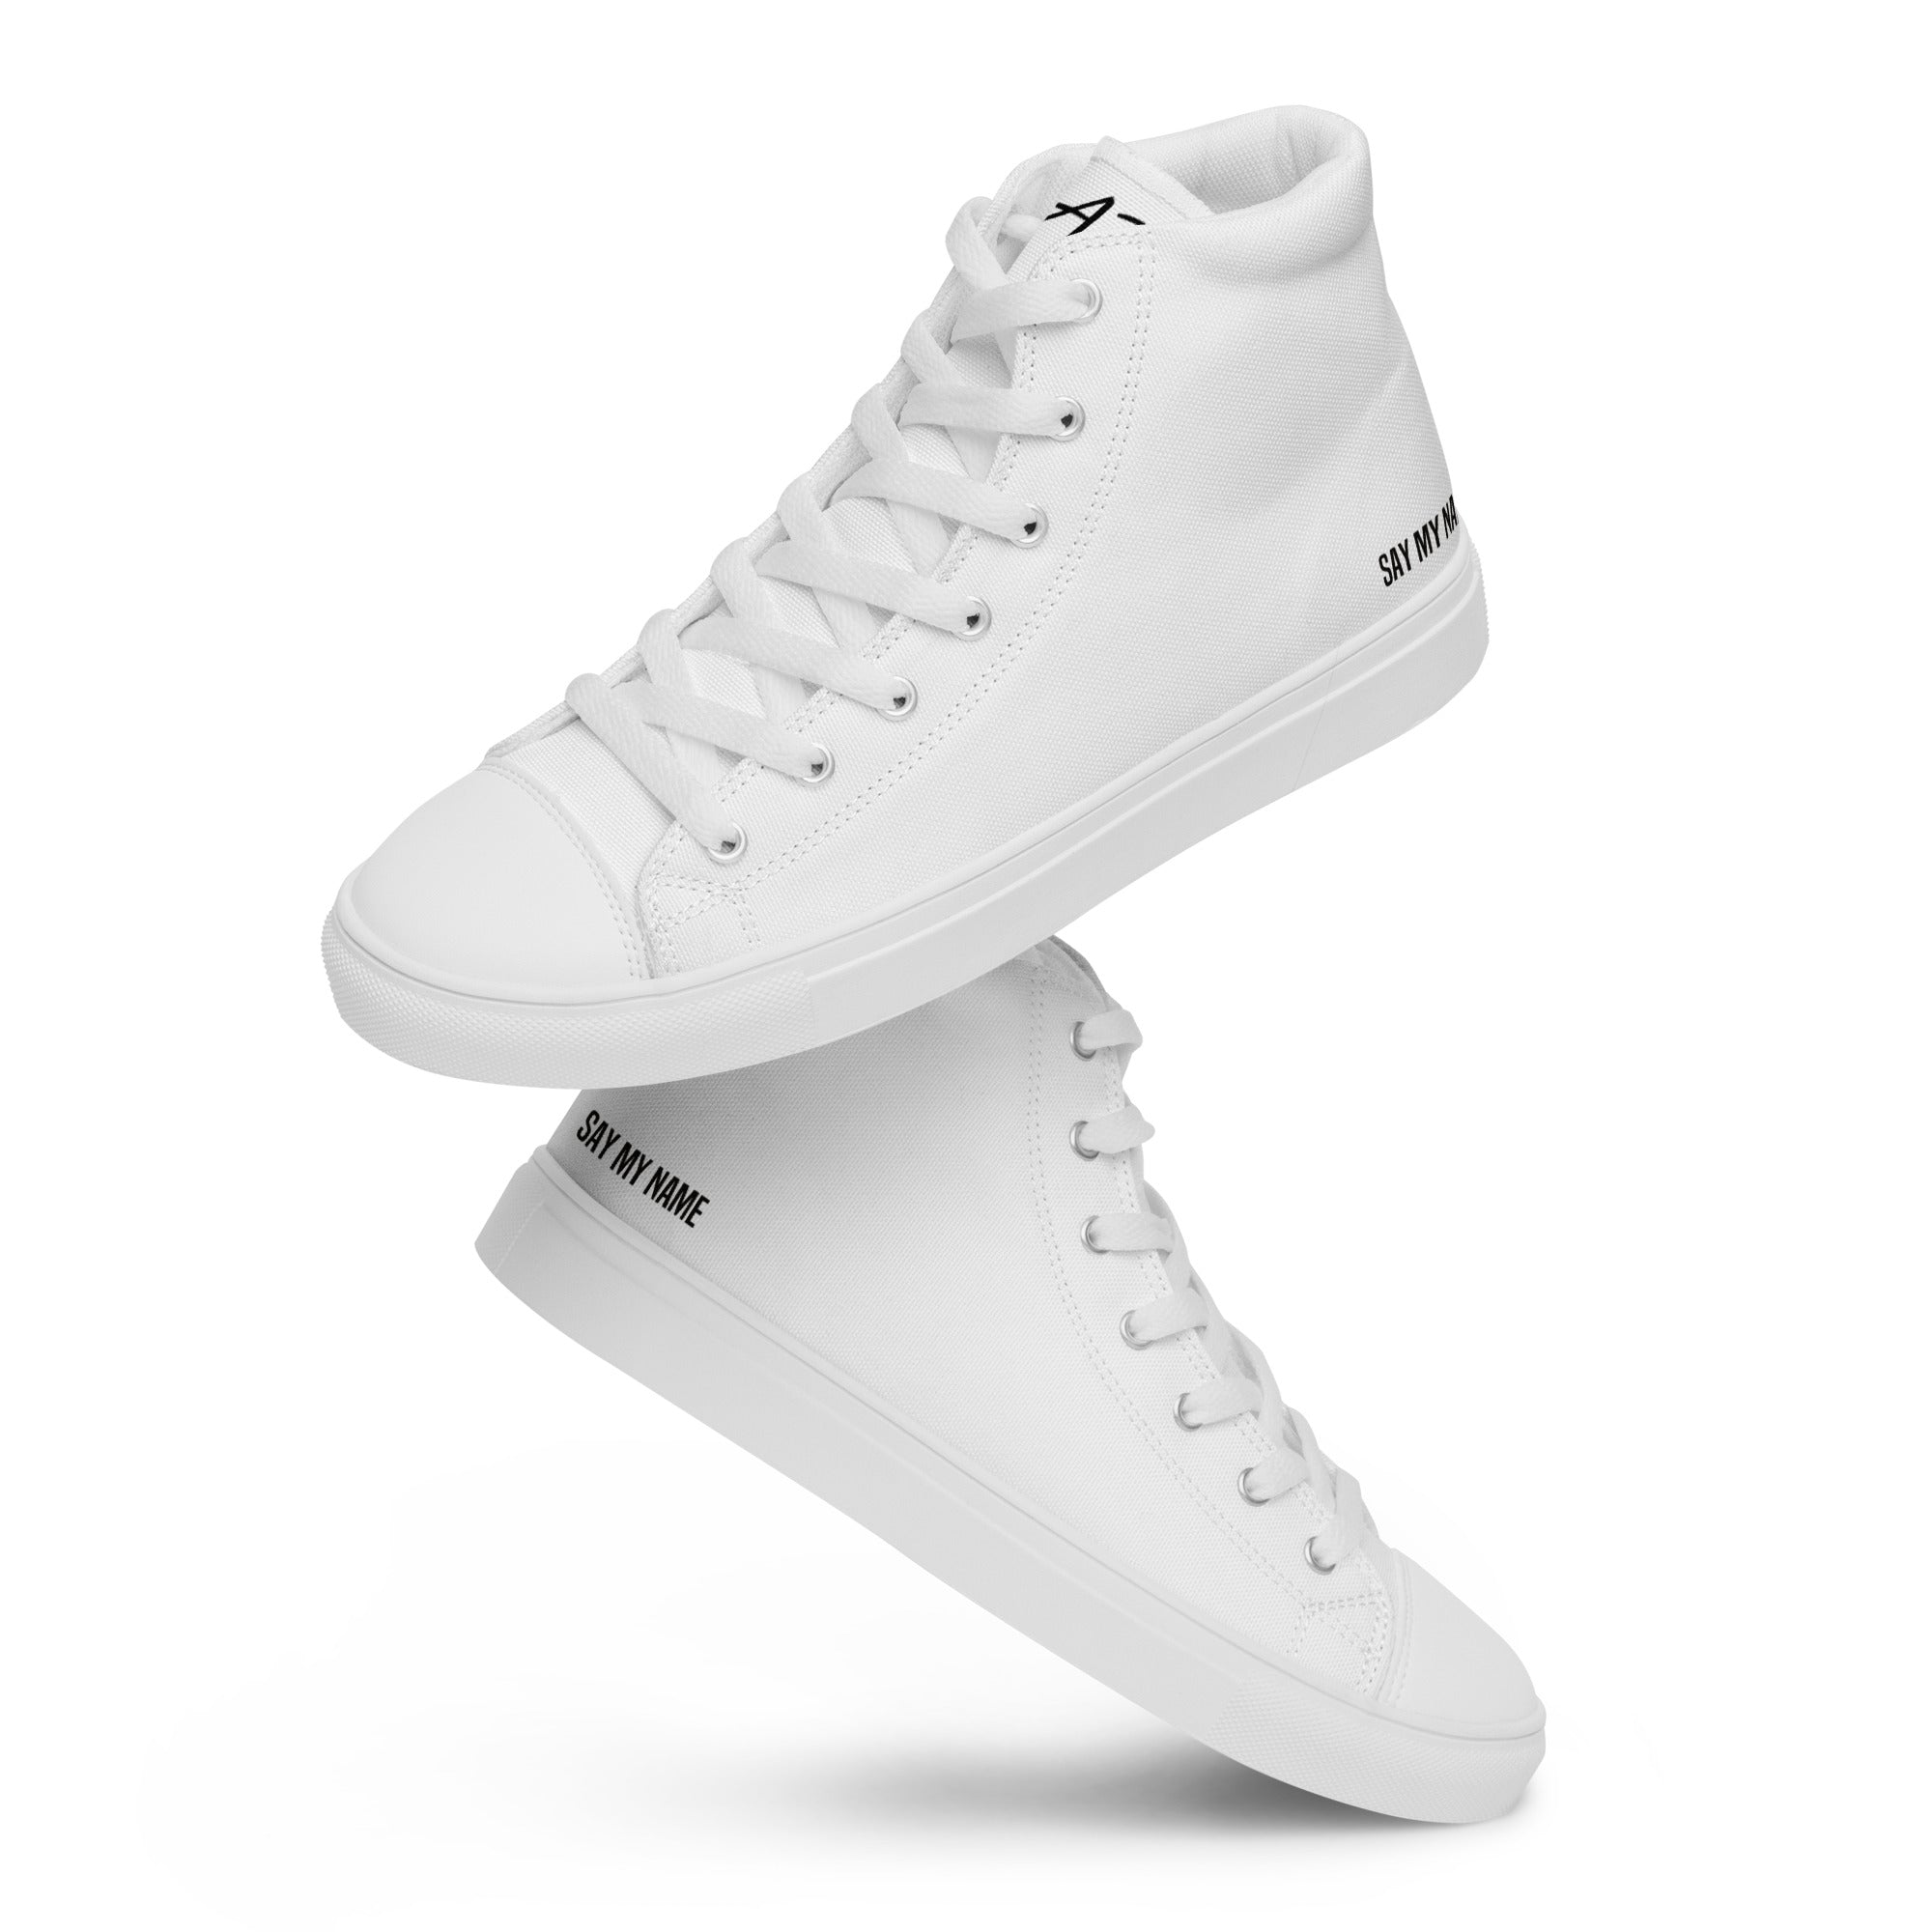 "SAY MY NAME" men's high white canvas sneakers